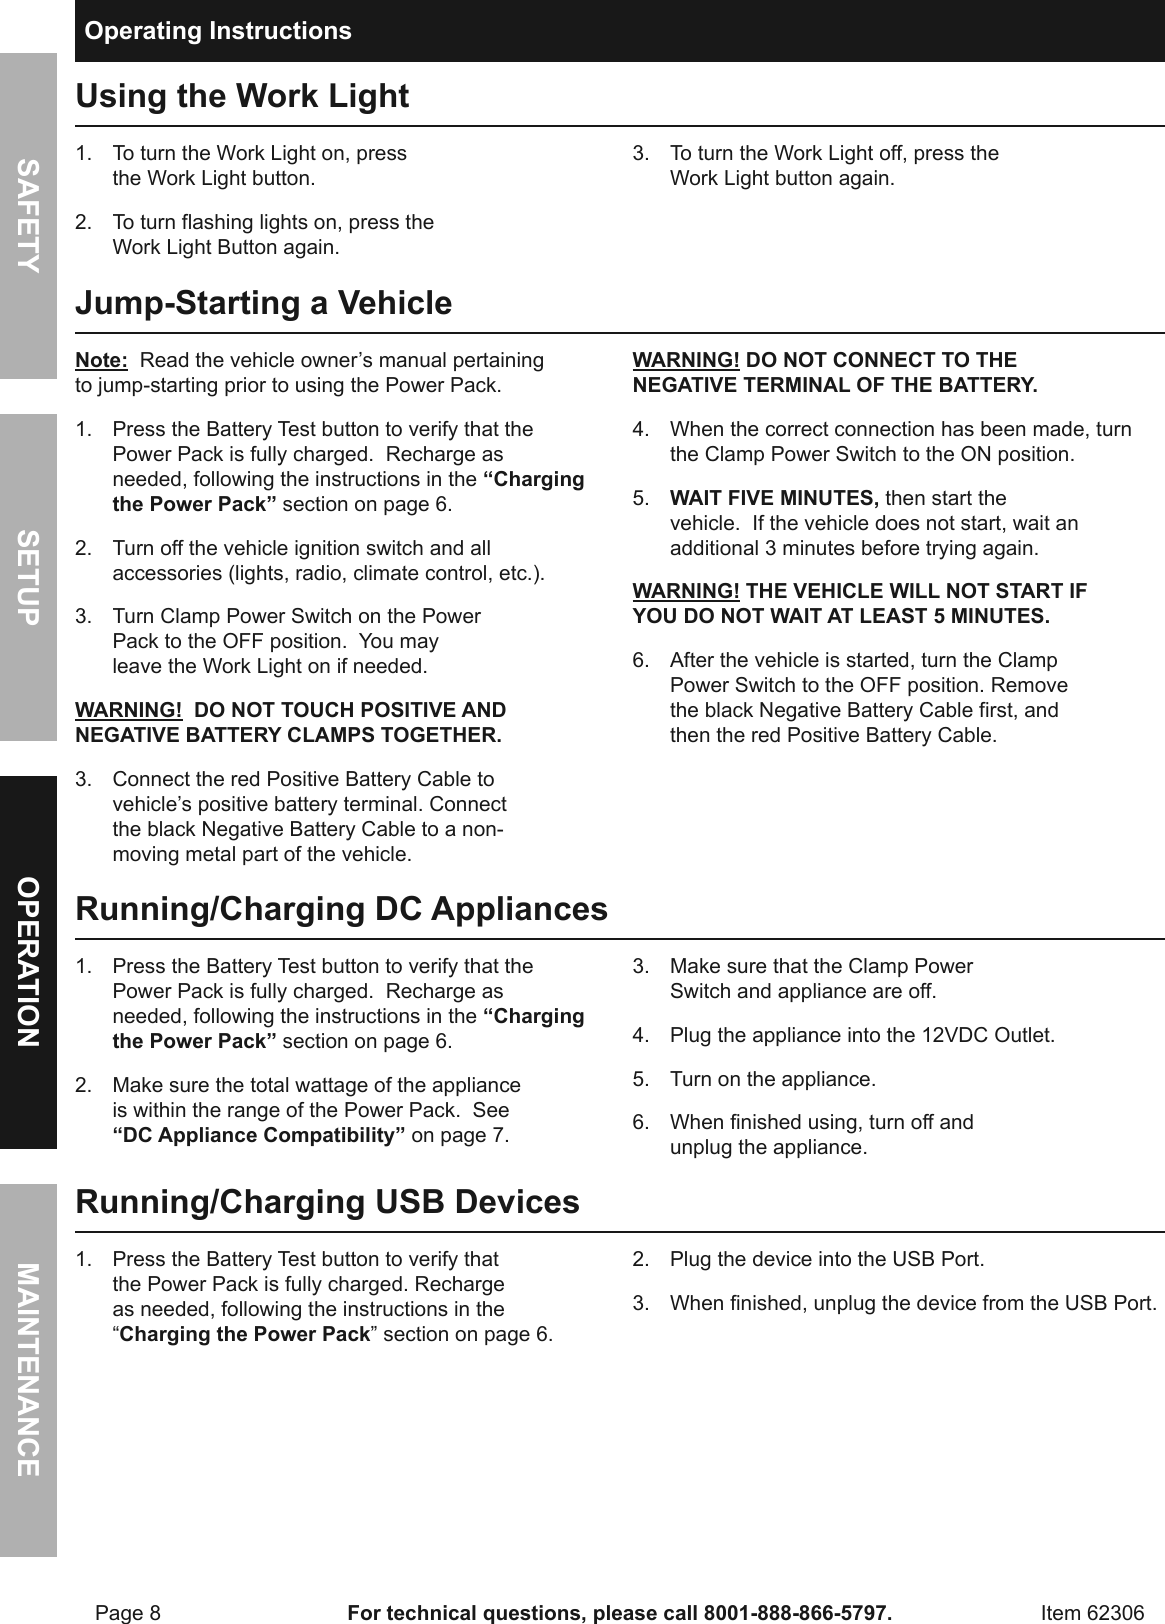 Page 8 of 12 - Manual For The 62306 3-in-1 Portable Power Pack With Jump Starter